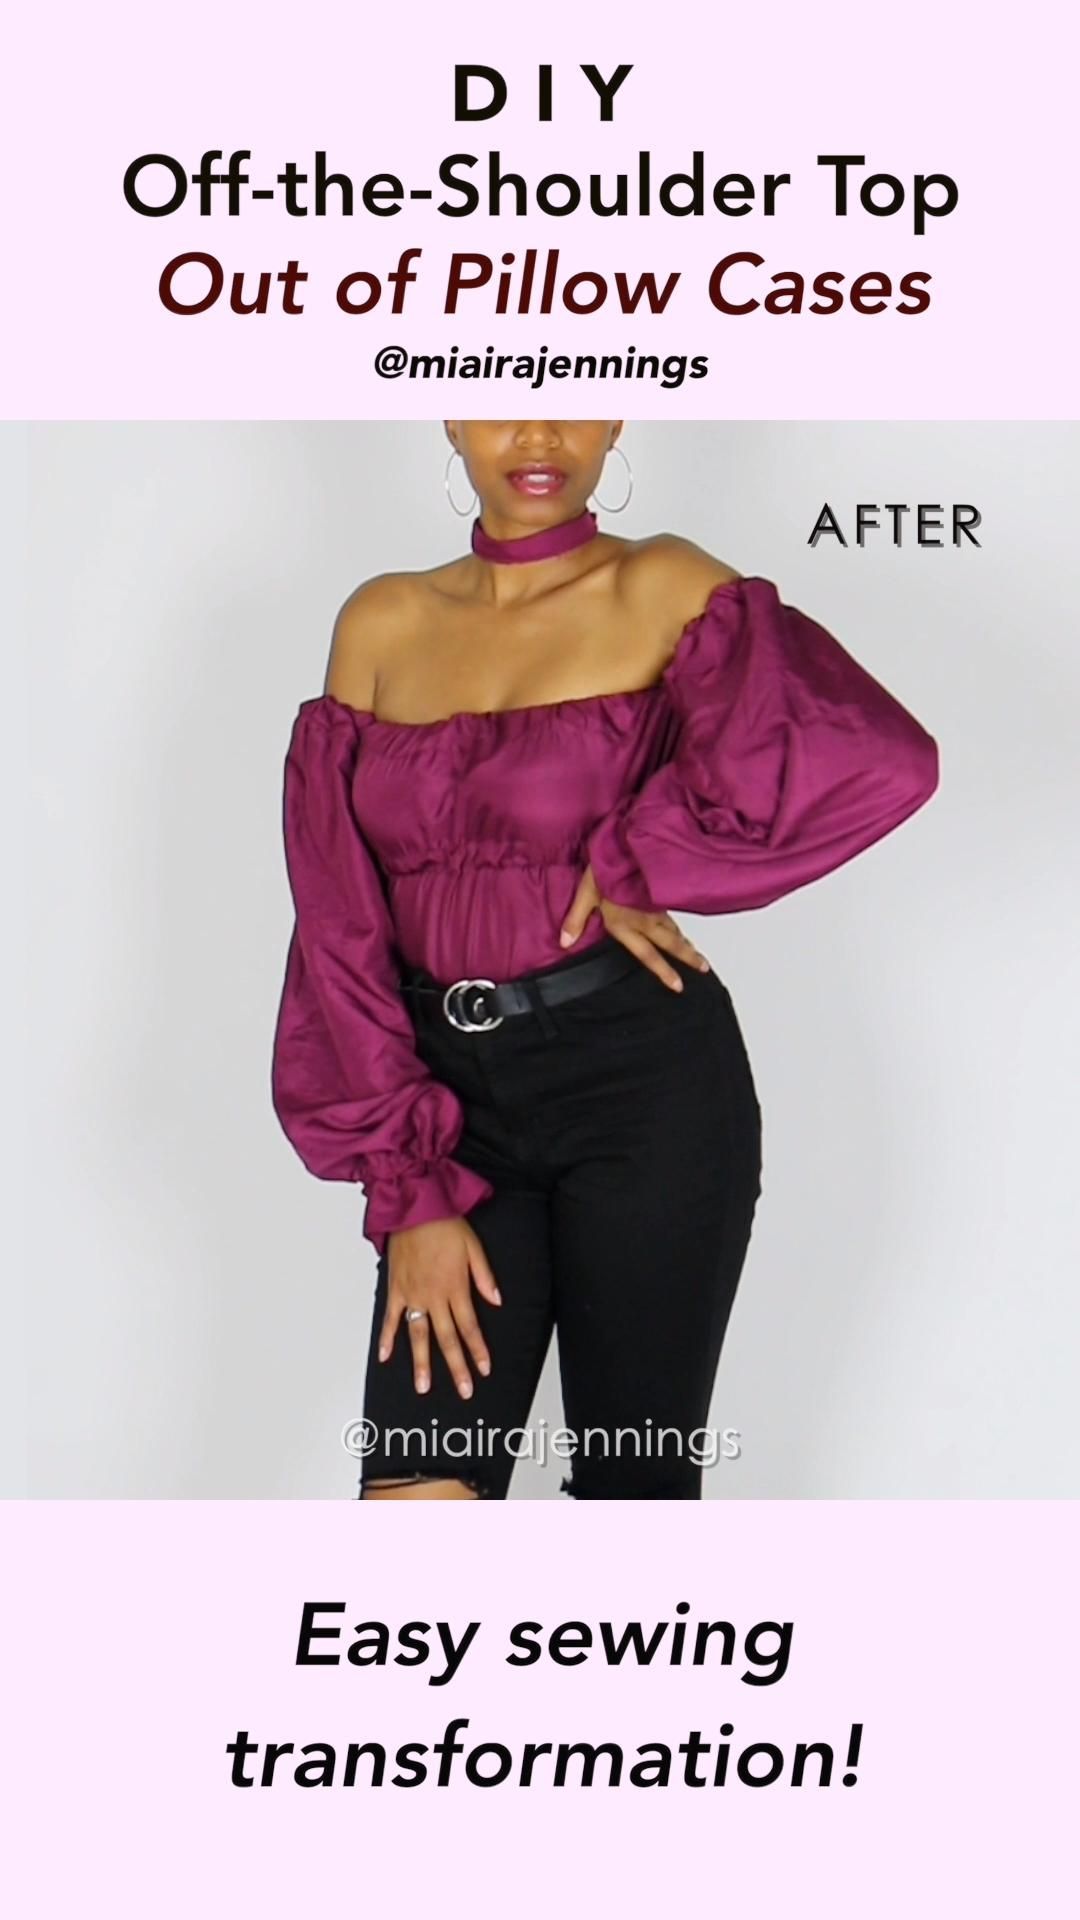 DIY Puff Sleeve Off-the-Shoulder Top Out of Pillow Cases (Easy Sewing!) - DIY Puff Sleeve Off-the-Shoulder Top Out of Pillow Cases (Easy Sewing!) -   18 diy Clothes simple ideas